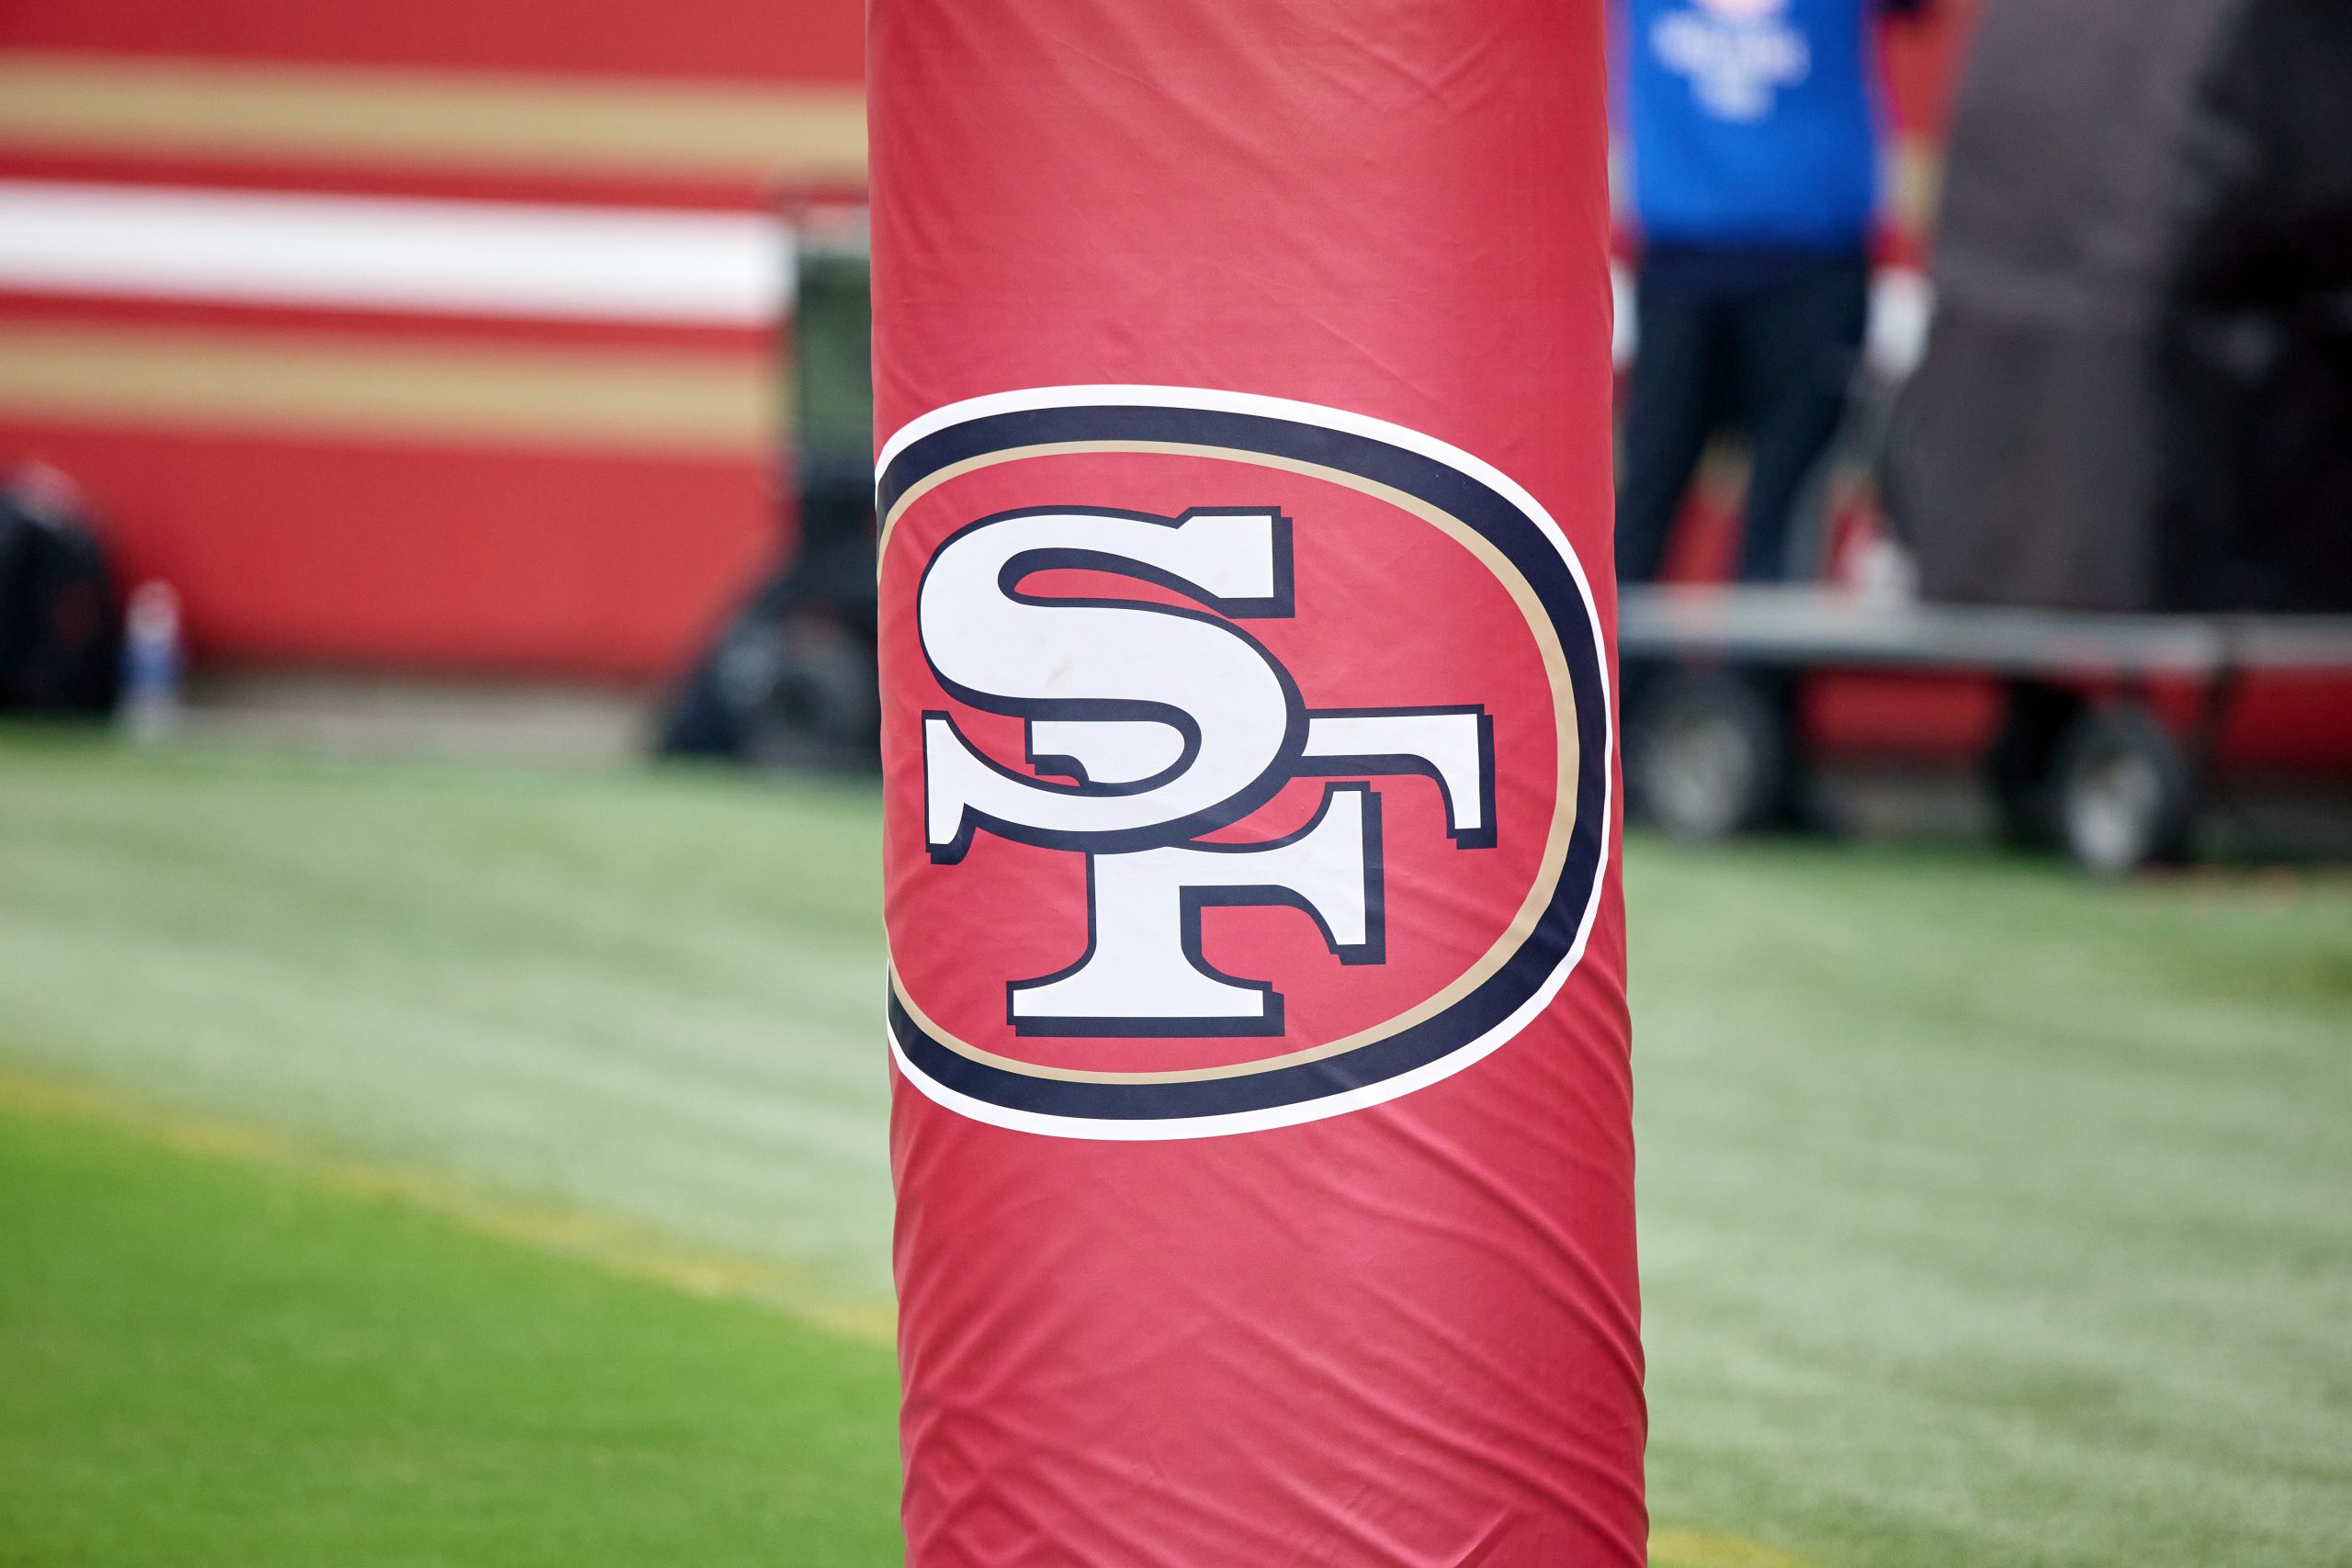 A detail view of San Francisco 49ers logo is seen on a goal post during the NFL game between the Sa...